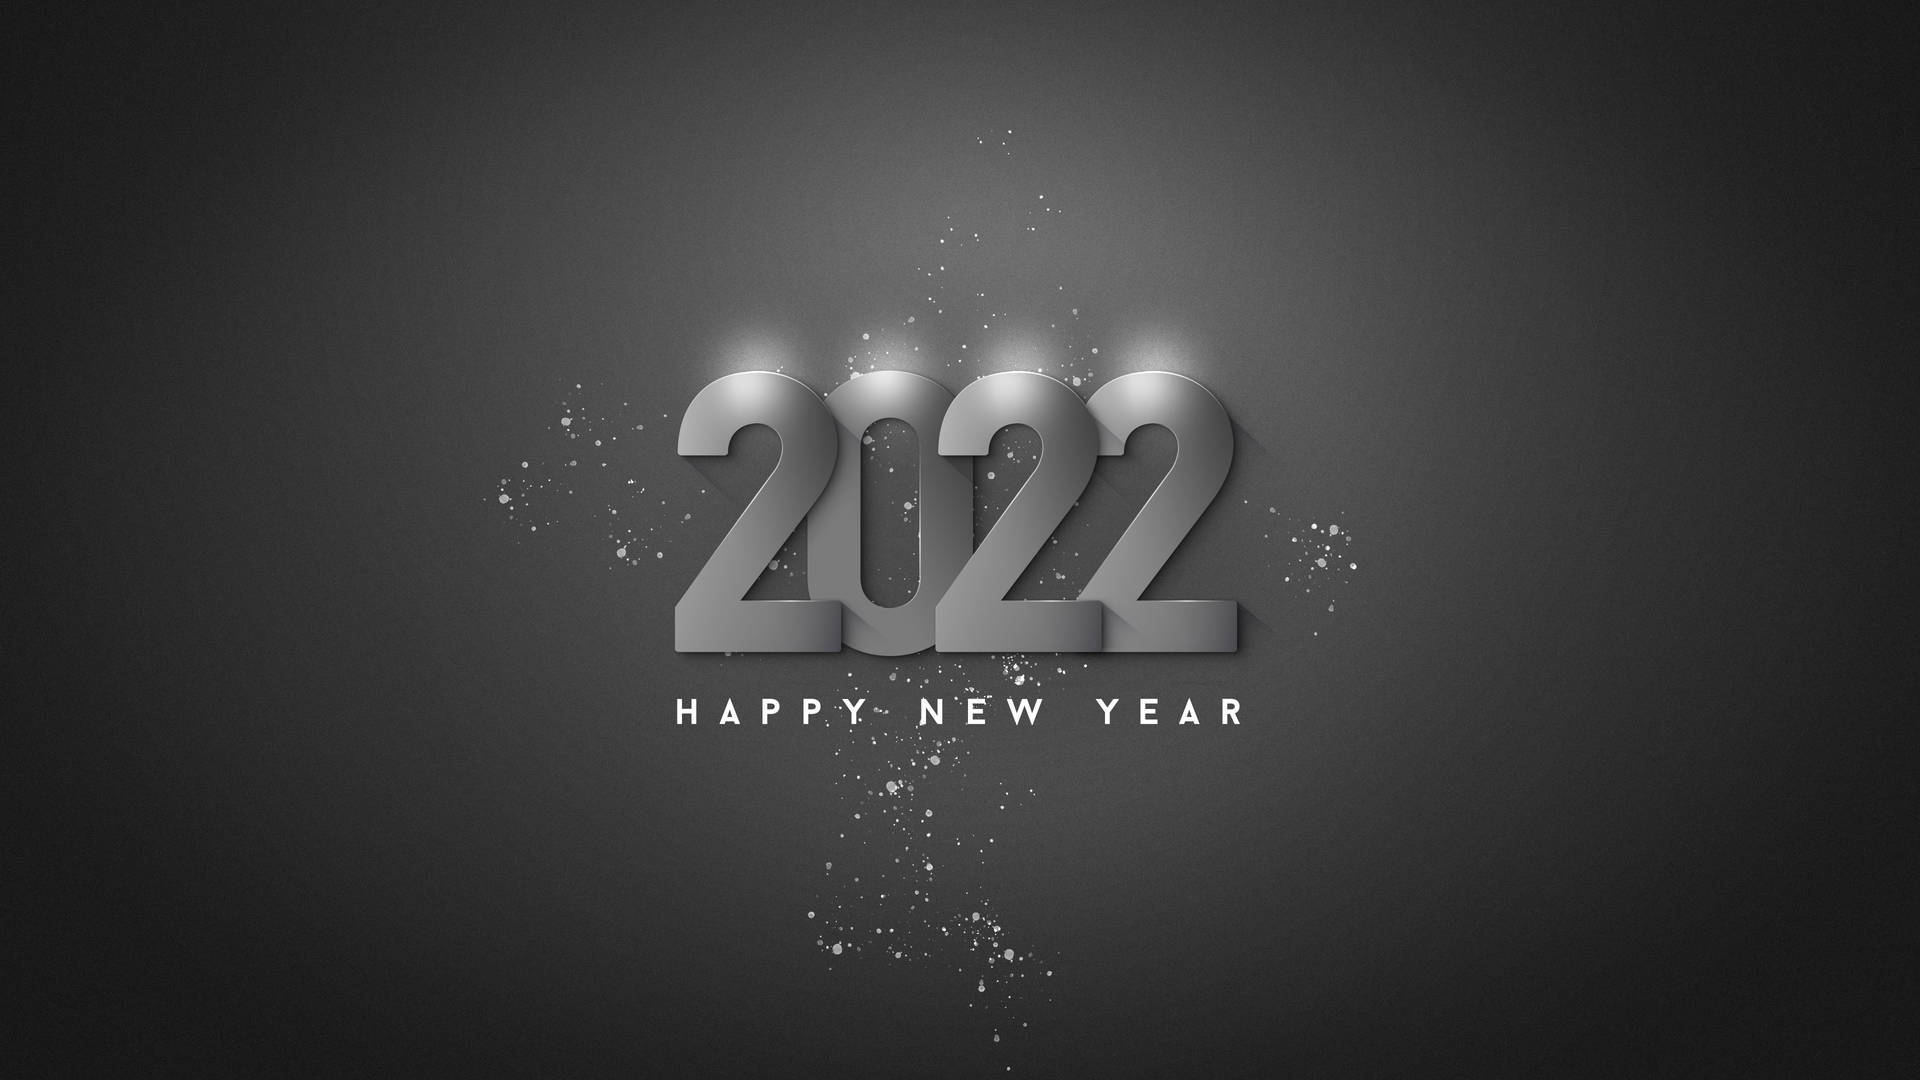 Embracing 2022: A Spectacular New Year's Celebration Wallpaper